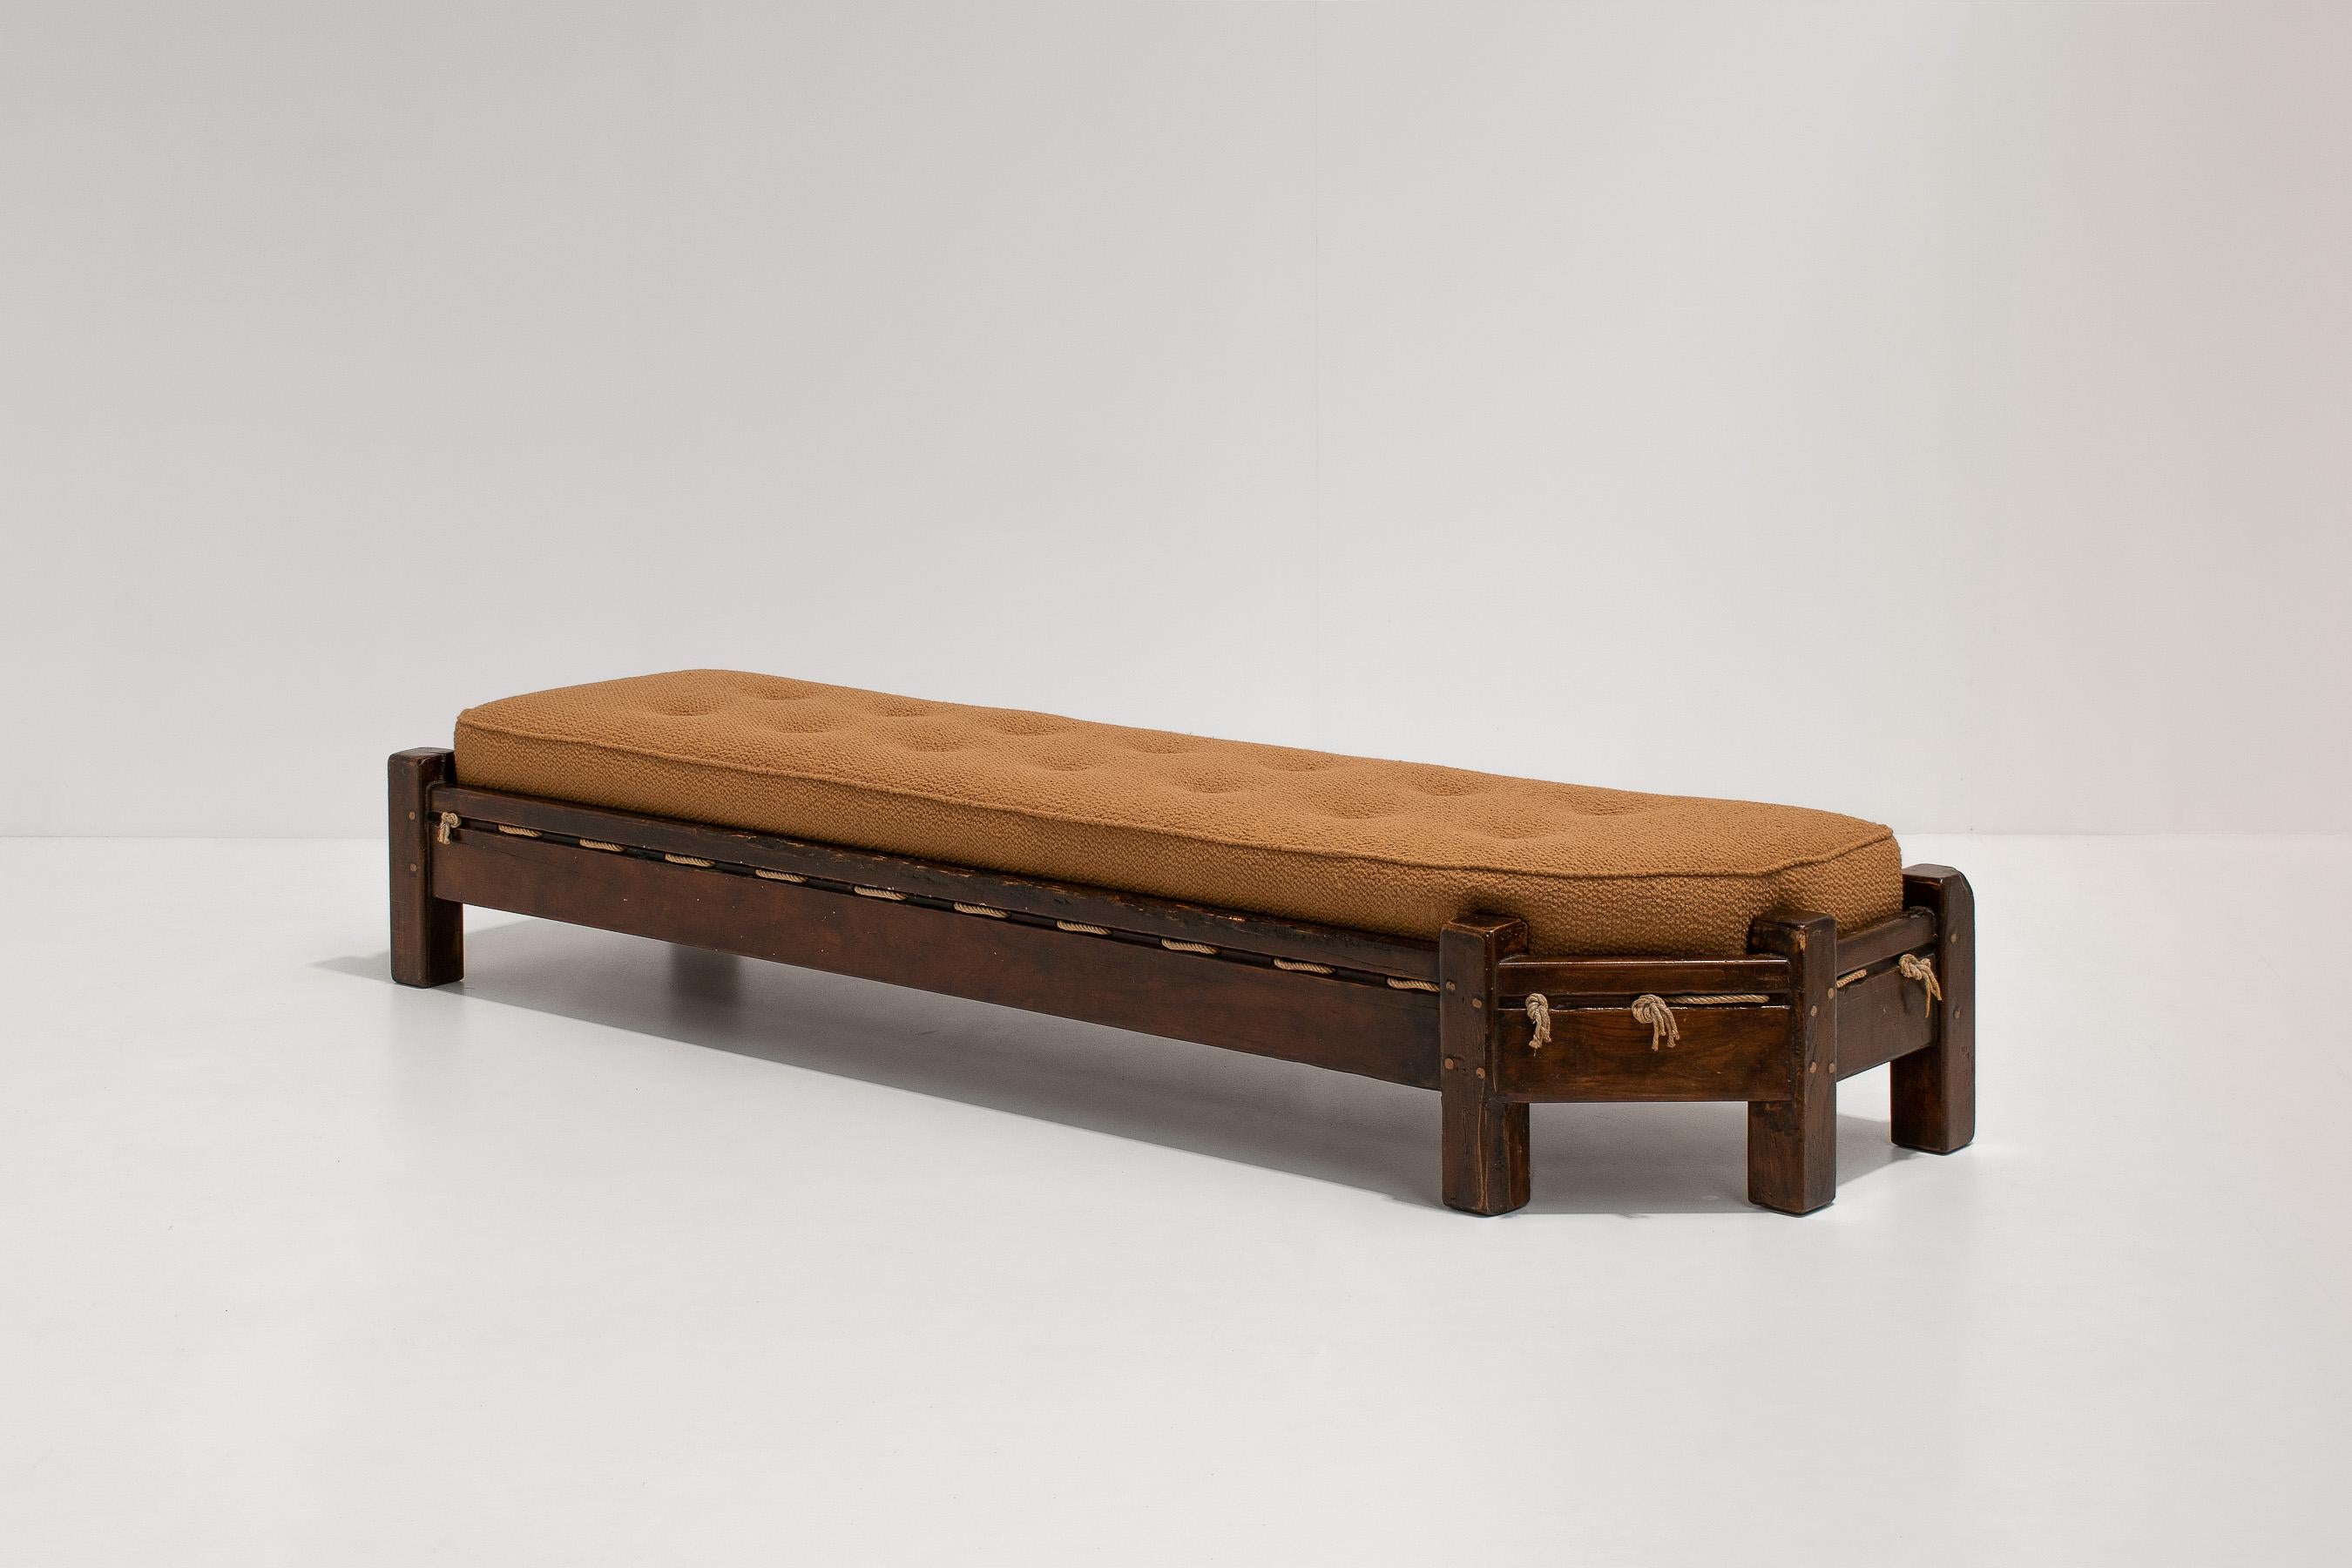 Sophisticated daybed with a solid wooden frame and structure in rope, 1960s, Mid-century, Wabi Sabi style.
Sourced in France and reminiscent of Charlotte Perriand and even some Brazilian mid-century designs.

The piece has a solid wooden frame